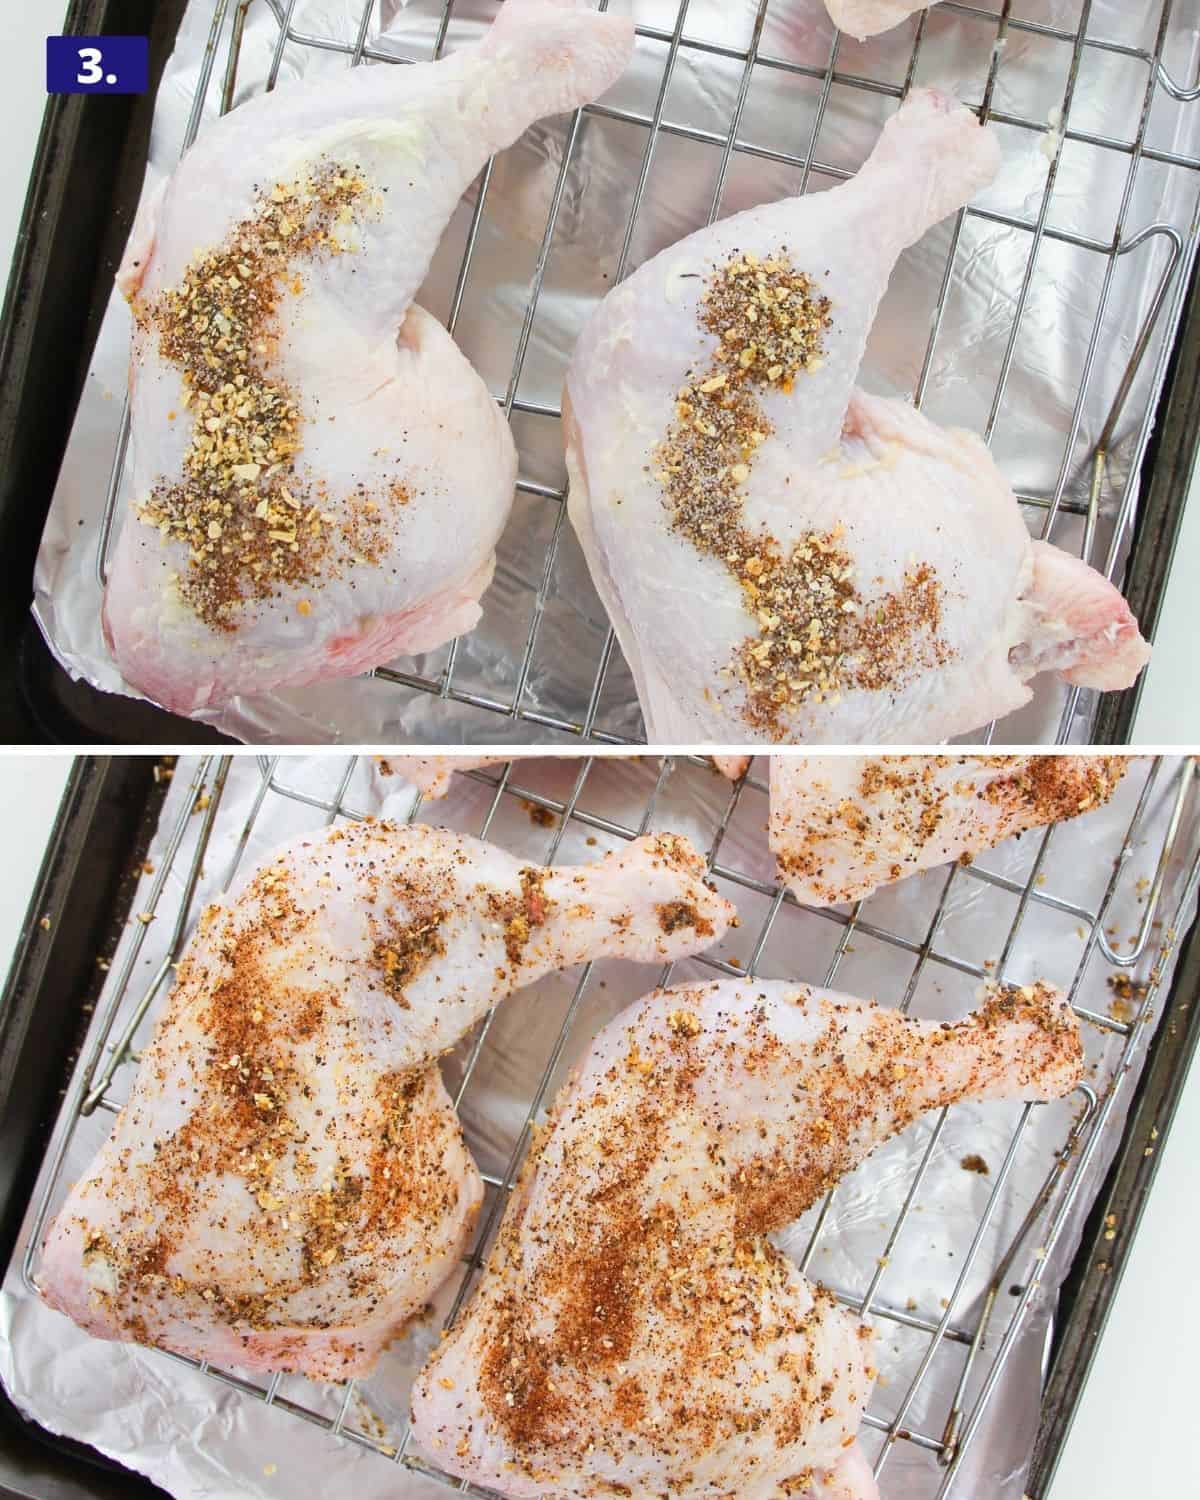 Spice rub on chicken leg quarters and a second photo with the rub spread over the legs